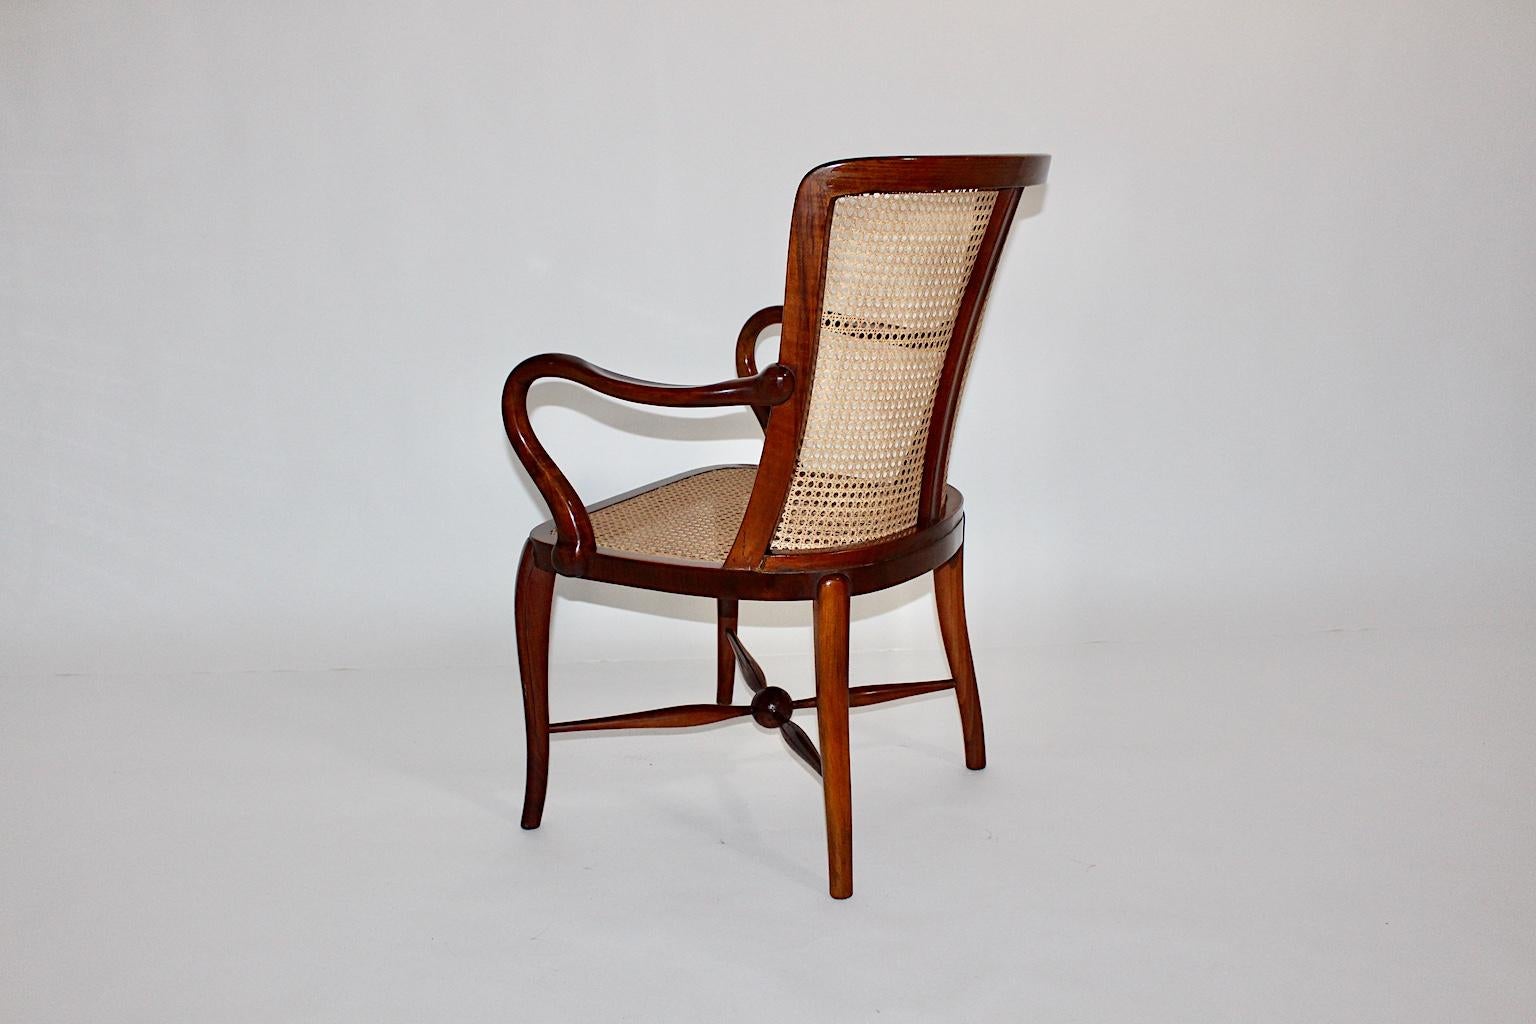 Art Deco vintage armchair or lounge chair design attributed to Walter Sobotka ( in the cercle of Josef Frank ) for Wiener Werkbundsiedlung, circa 1930.
This amazing Art Deco era armchair shows a solid walnut base, while the renewed seat and back